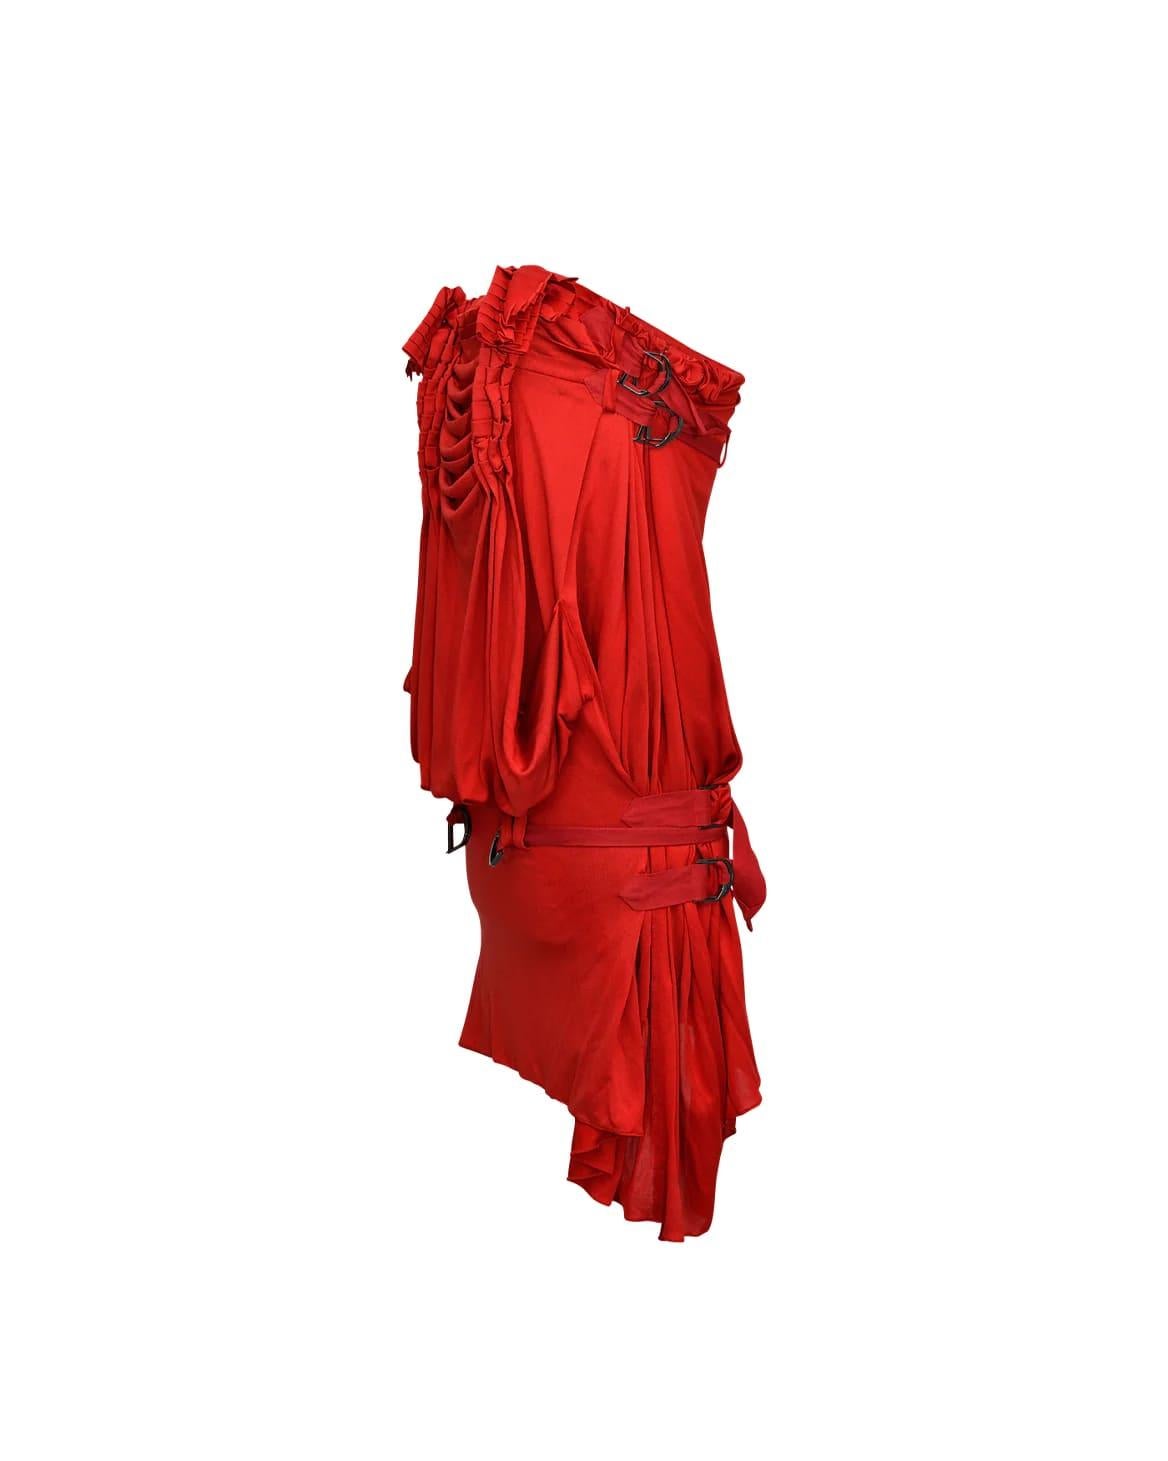 Women's S/S 2003 Christian Dior Red Strapless Mini Dress by Galliano